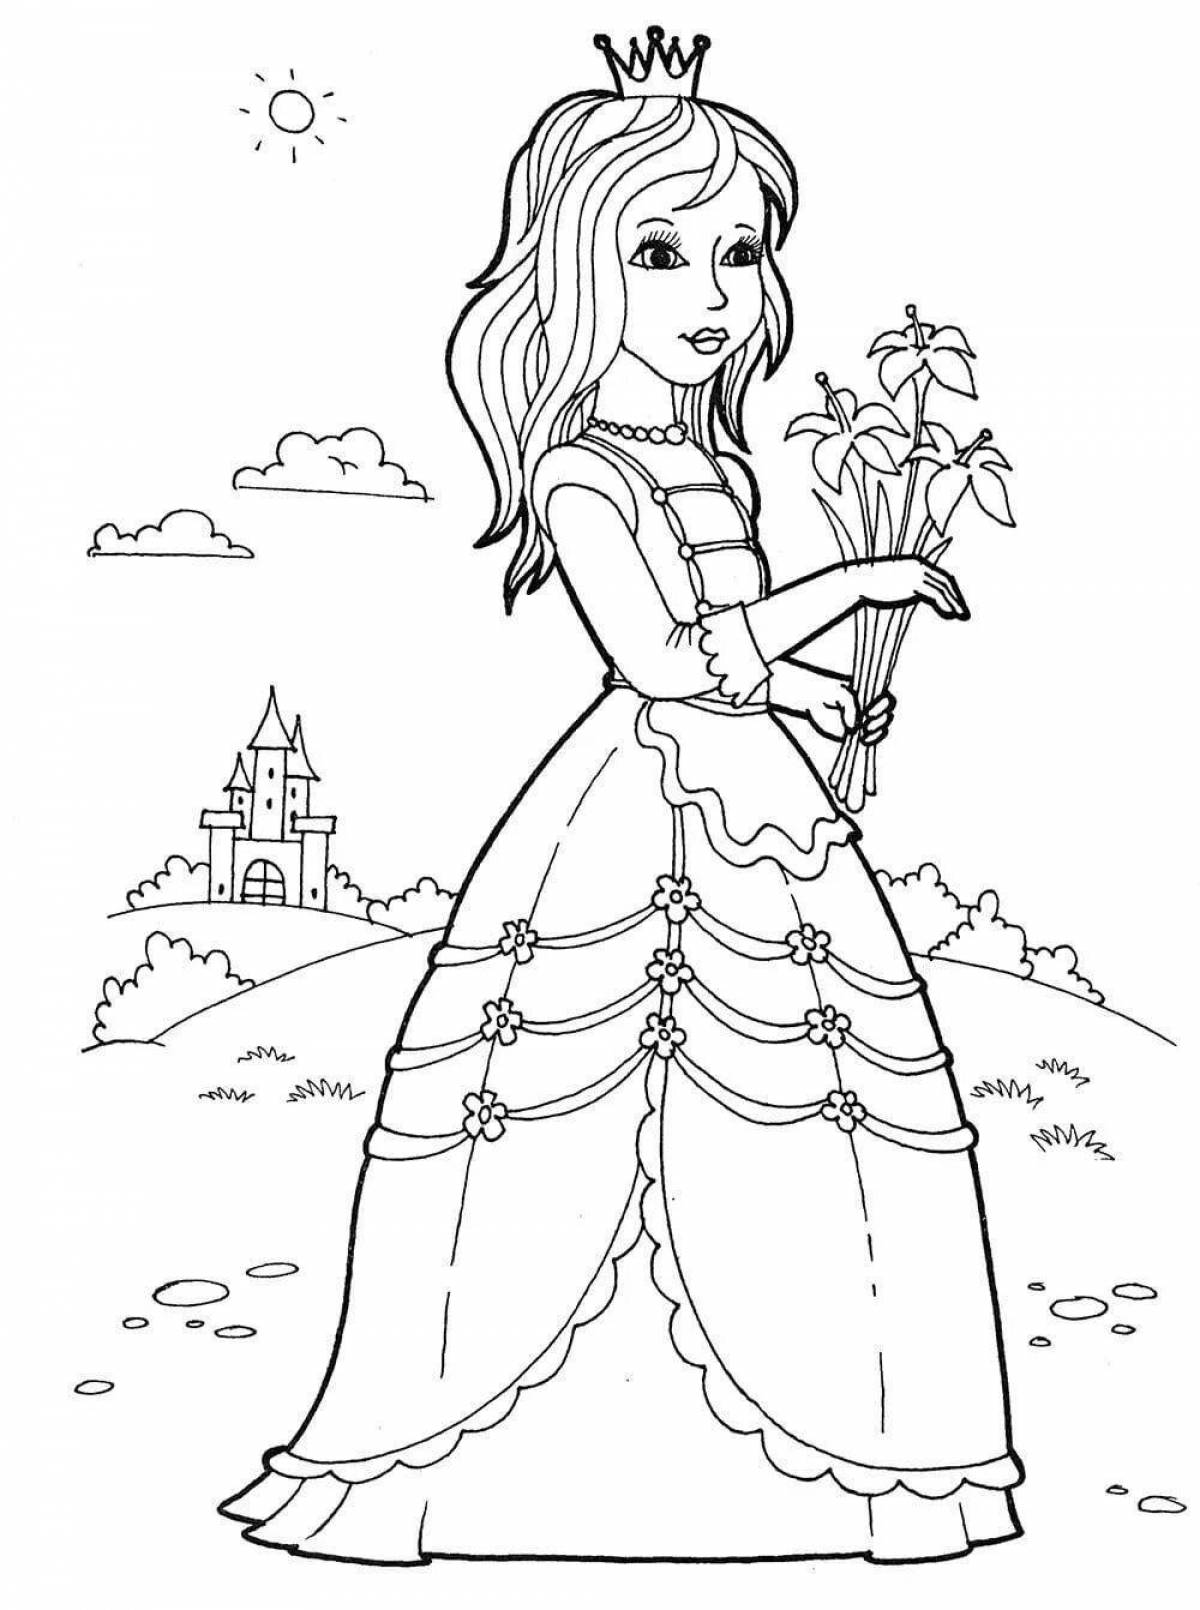 Exotic princess coloring pages for girls 7 years old